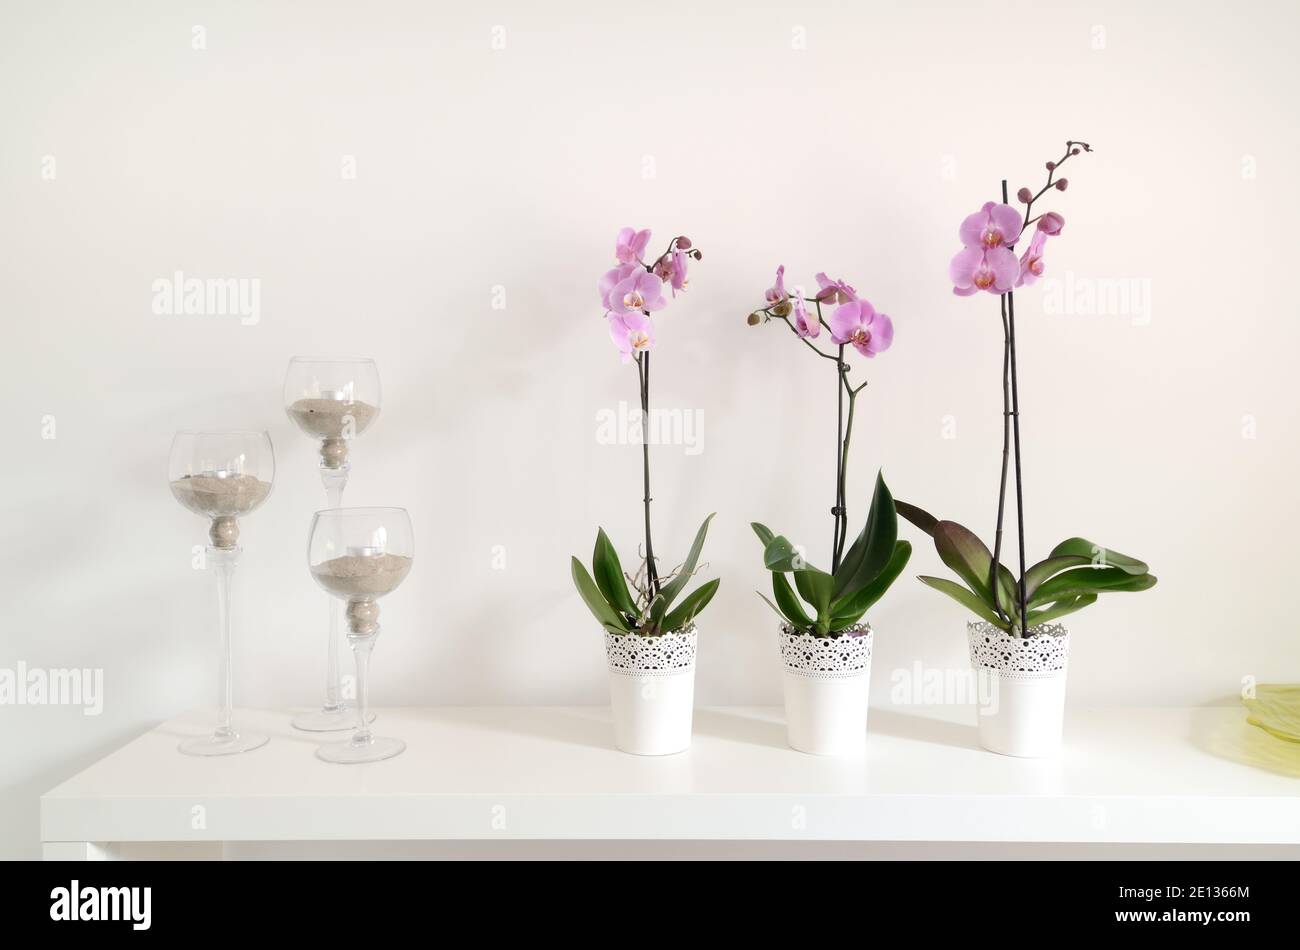 Abstract Still Life with Three Orchids and Candles in Glasses Against White Background Stock Photo